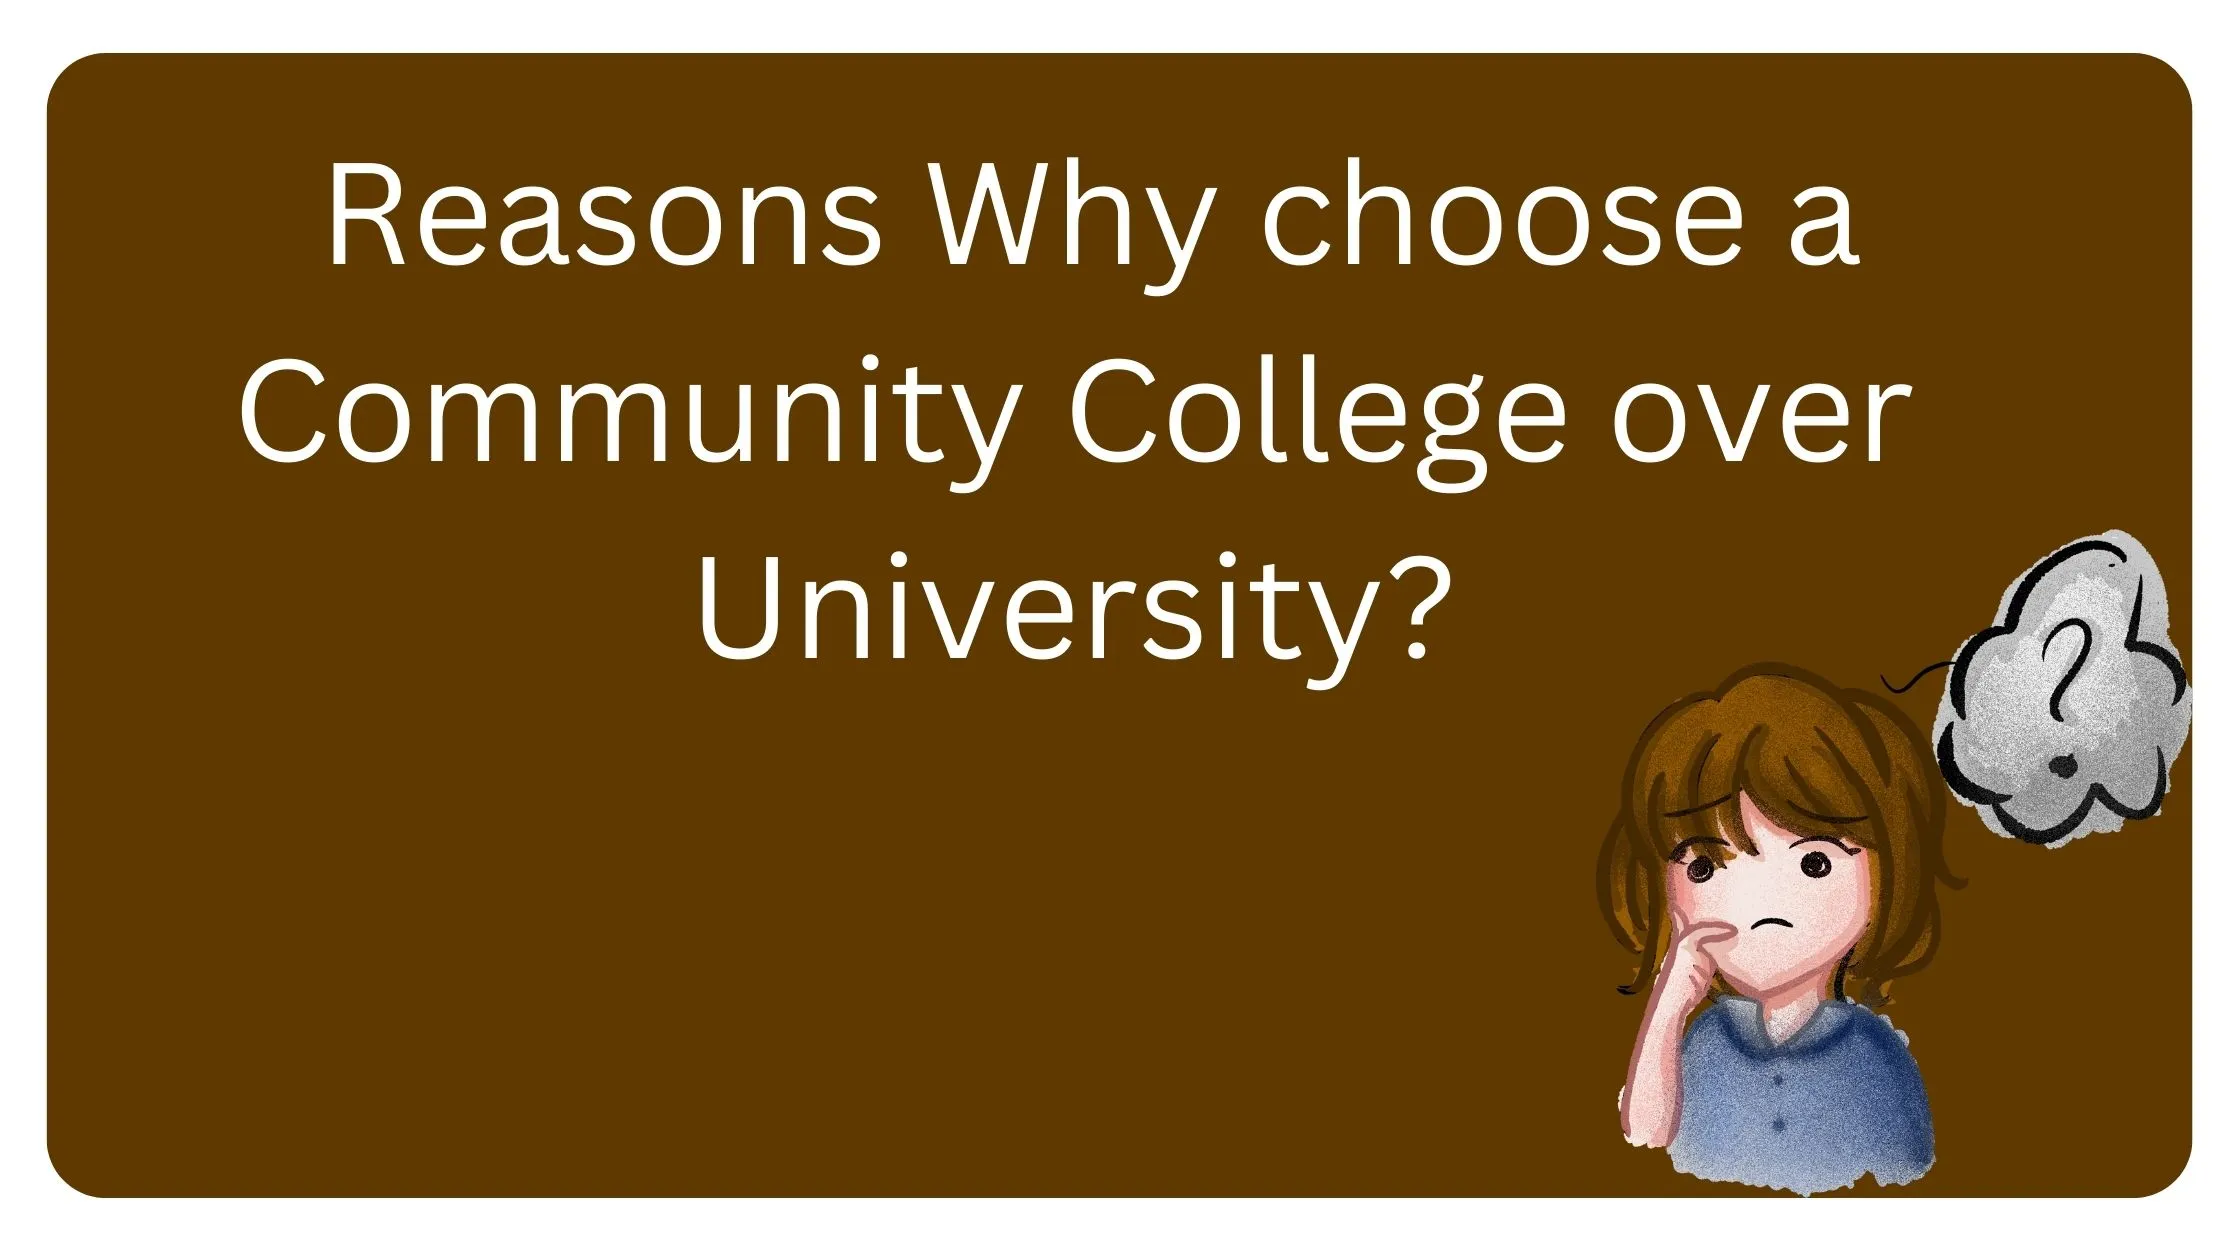 Reasons Why choose a Community College over University?